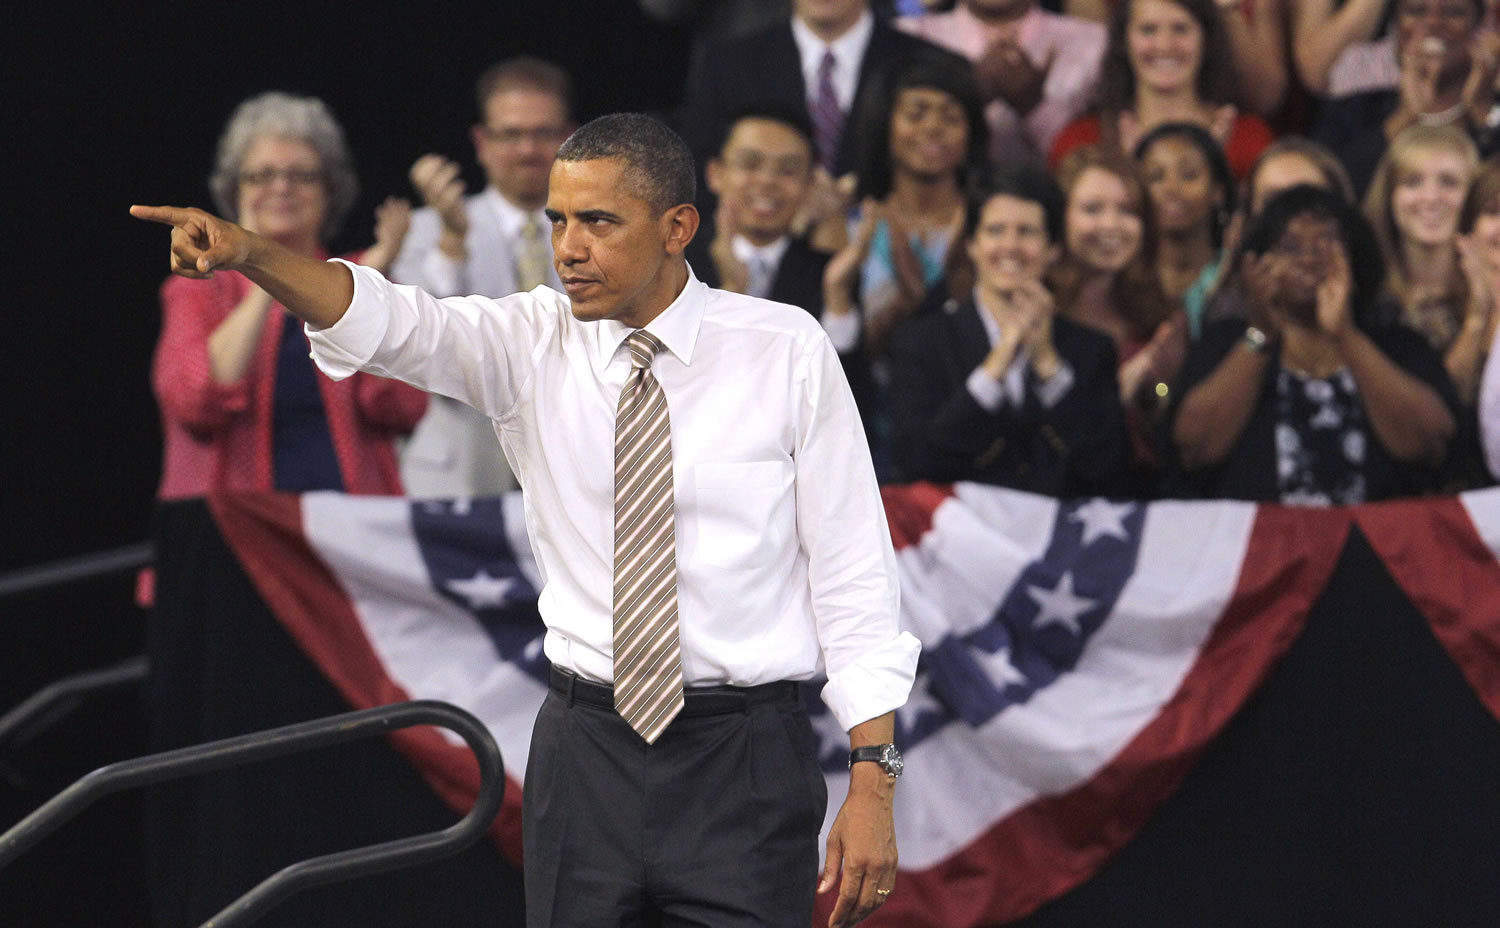 President Barack Obama points to the crowd Wednesday following his speech at North Carolina State University in Raleigh, N.C., where he spoke about the American Jobs Act.